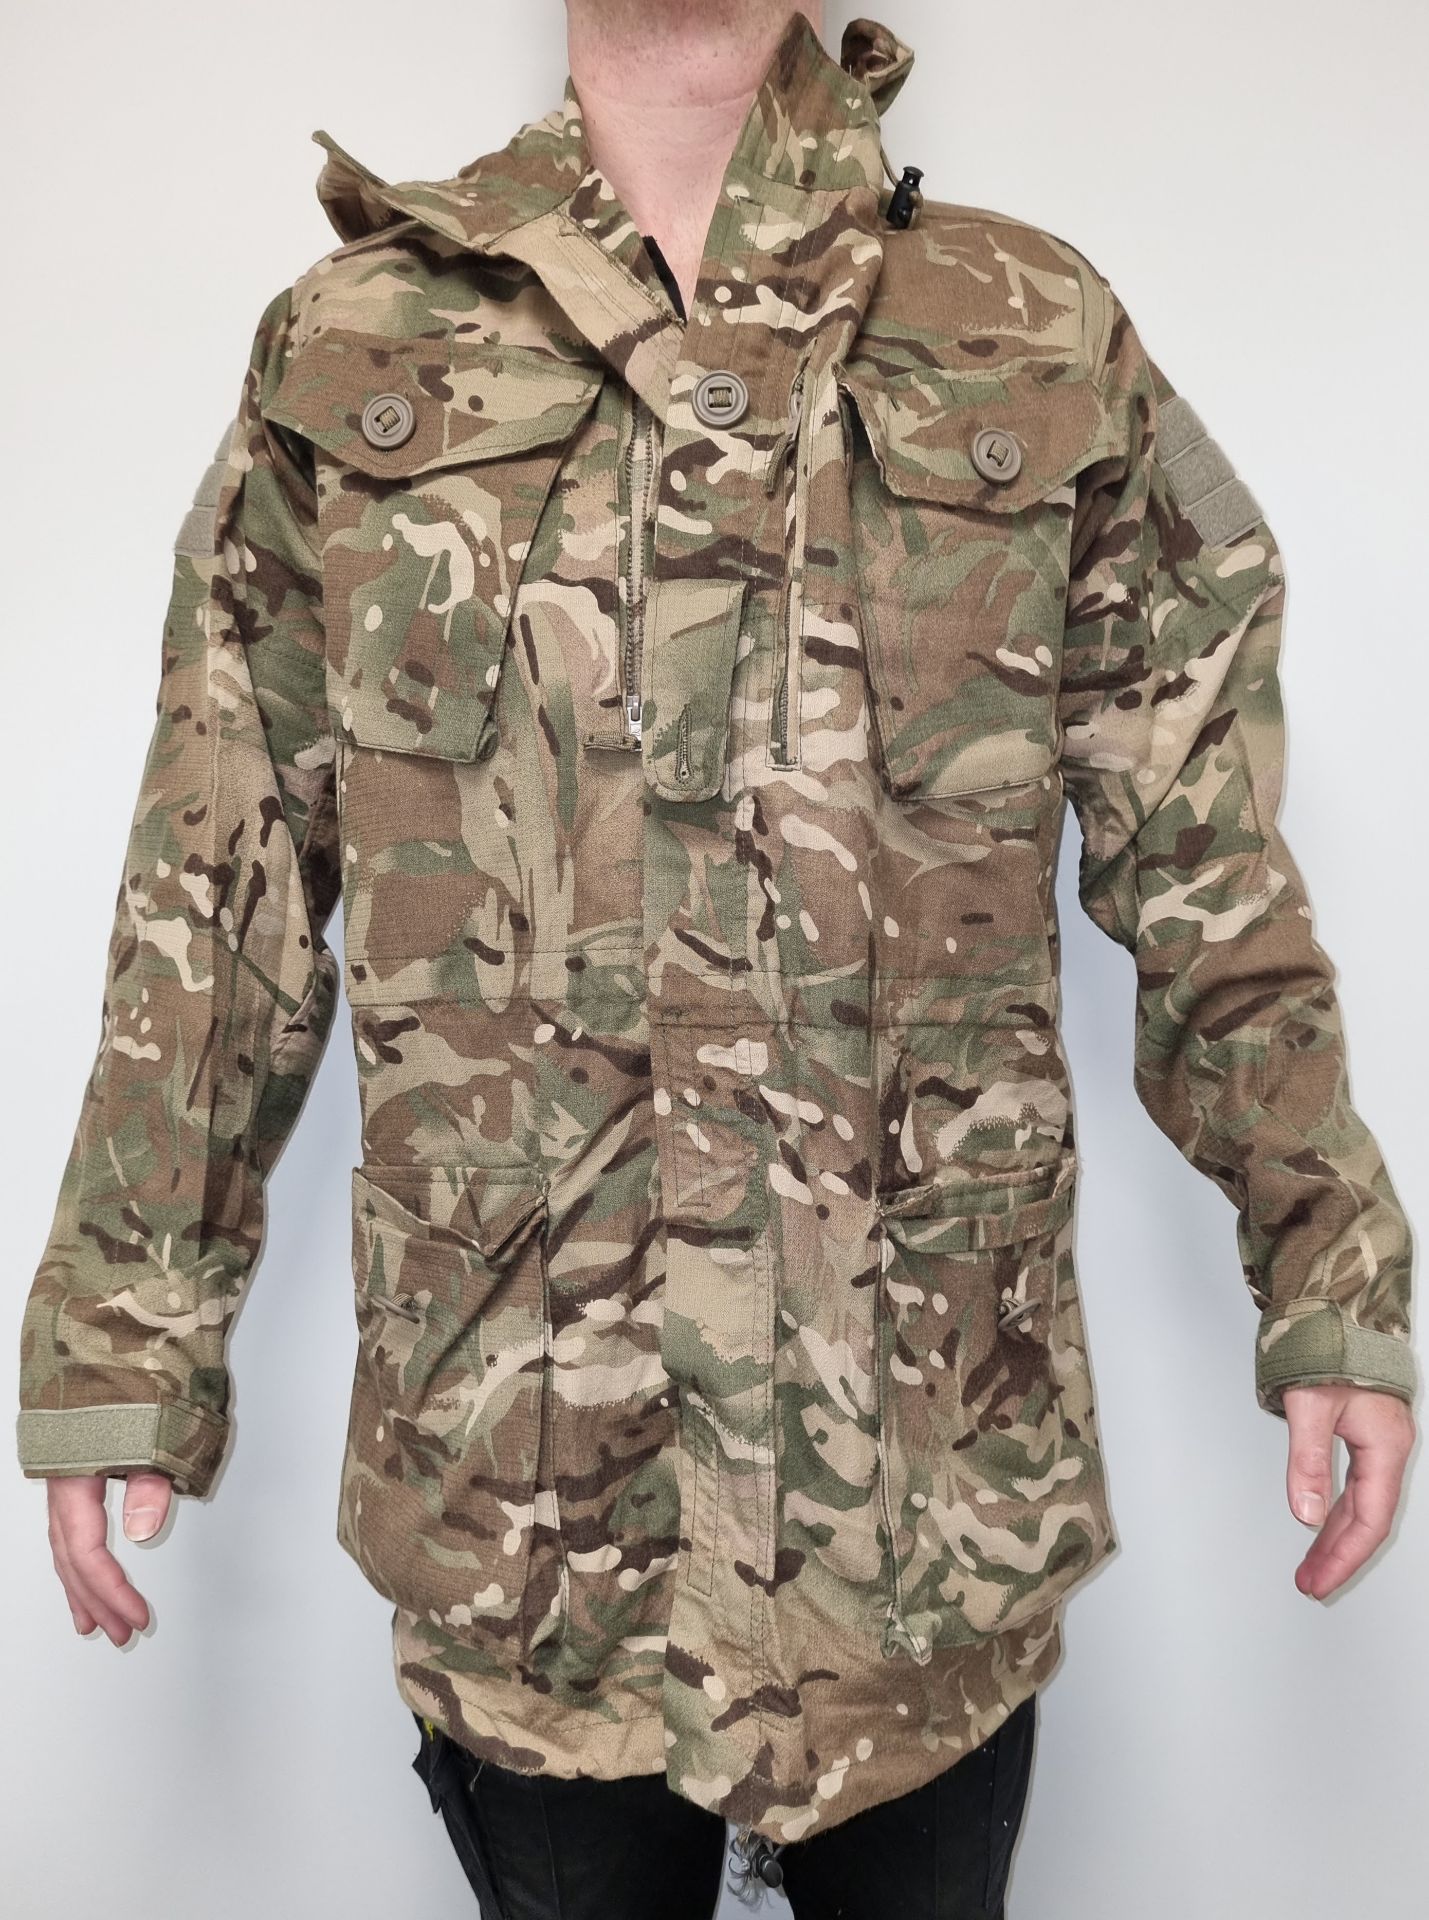 50x British Army MTP windproof smocks - mixed grades and sizes - Image 6 of 13